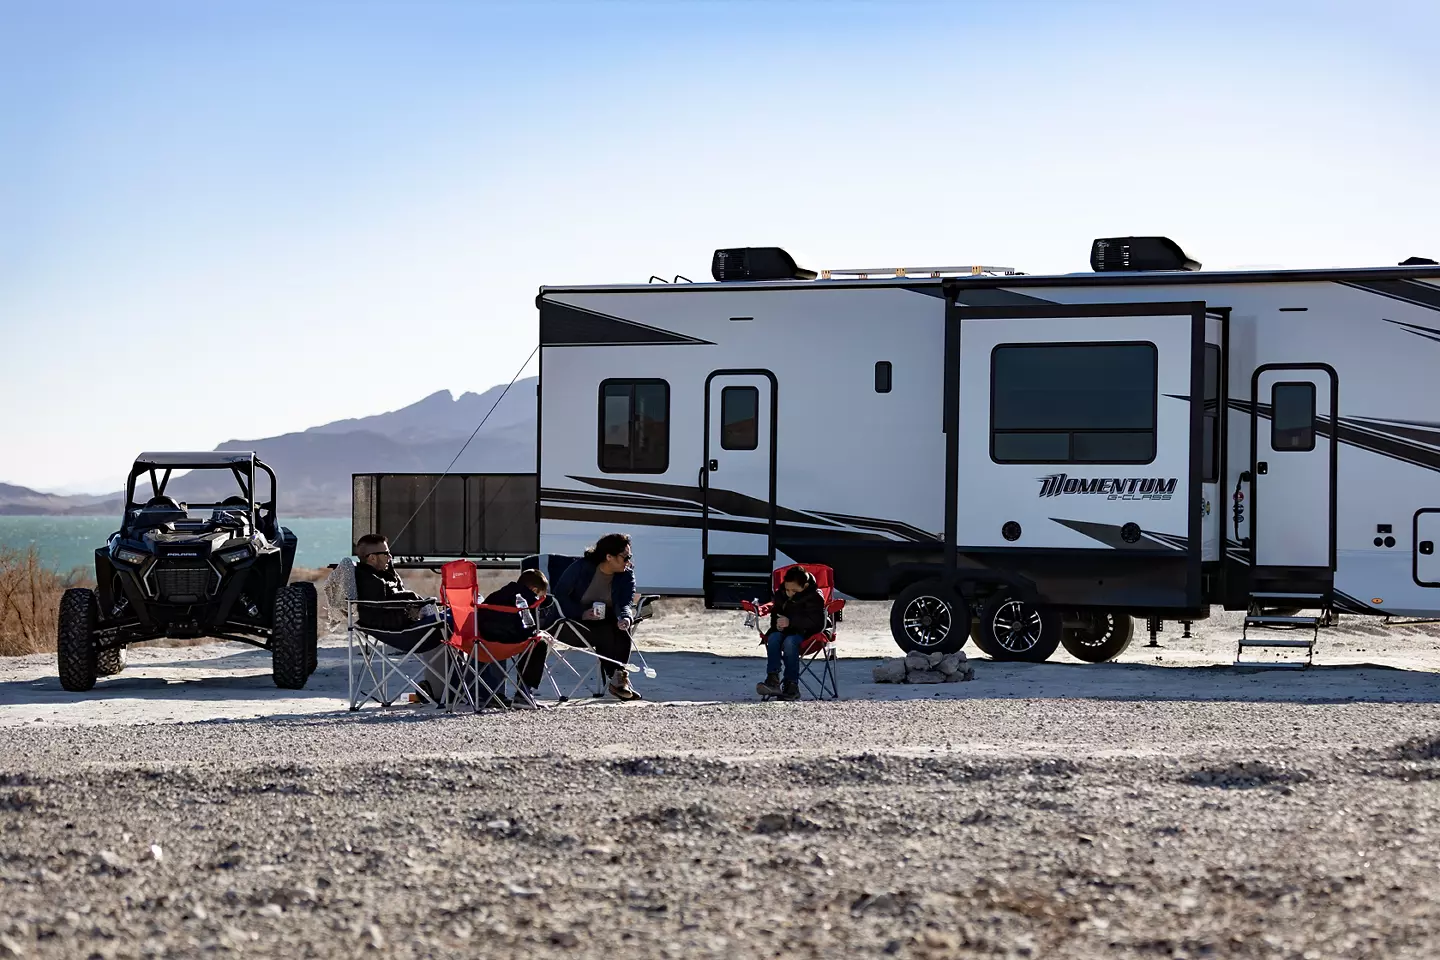 Polaris next to Momentum Toy Hauler, with campers sitting in camping chairs in front of the RV. 